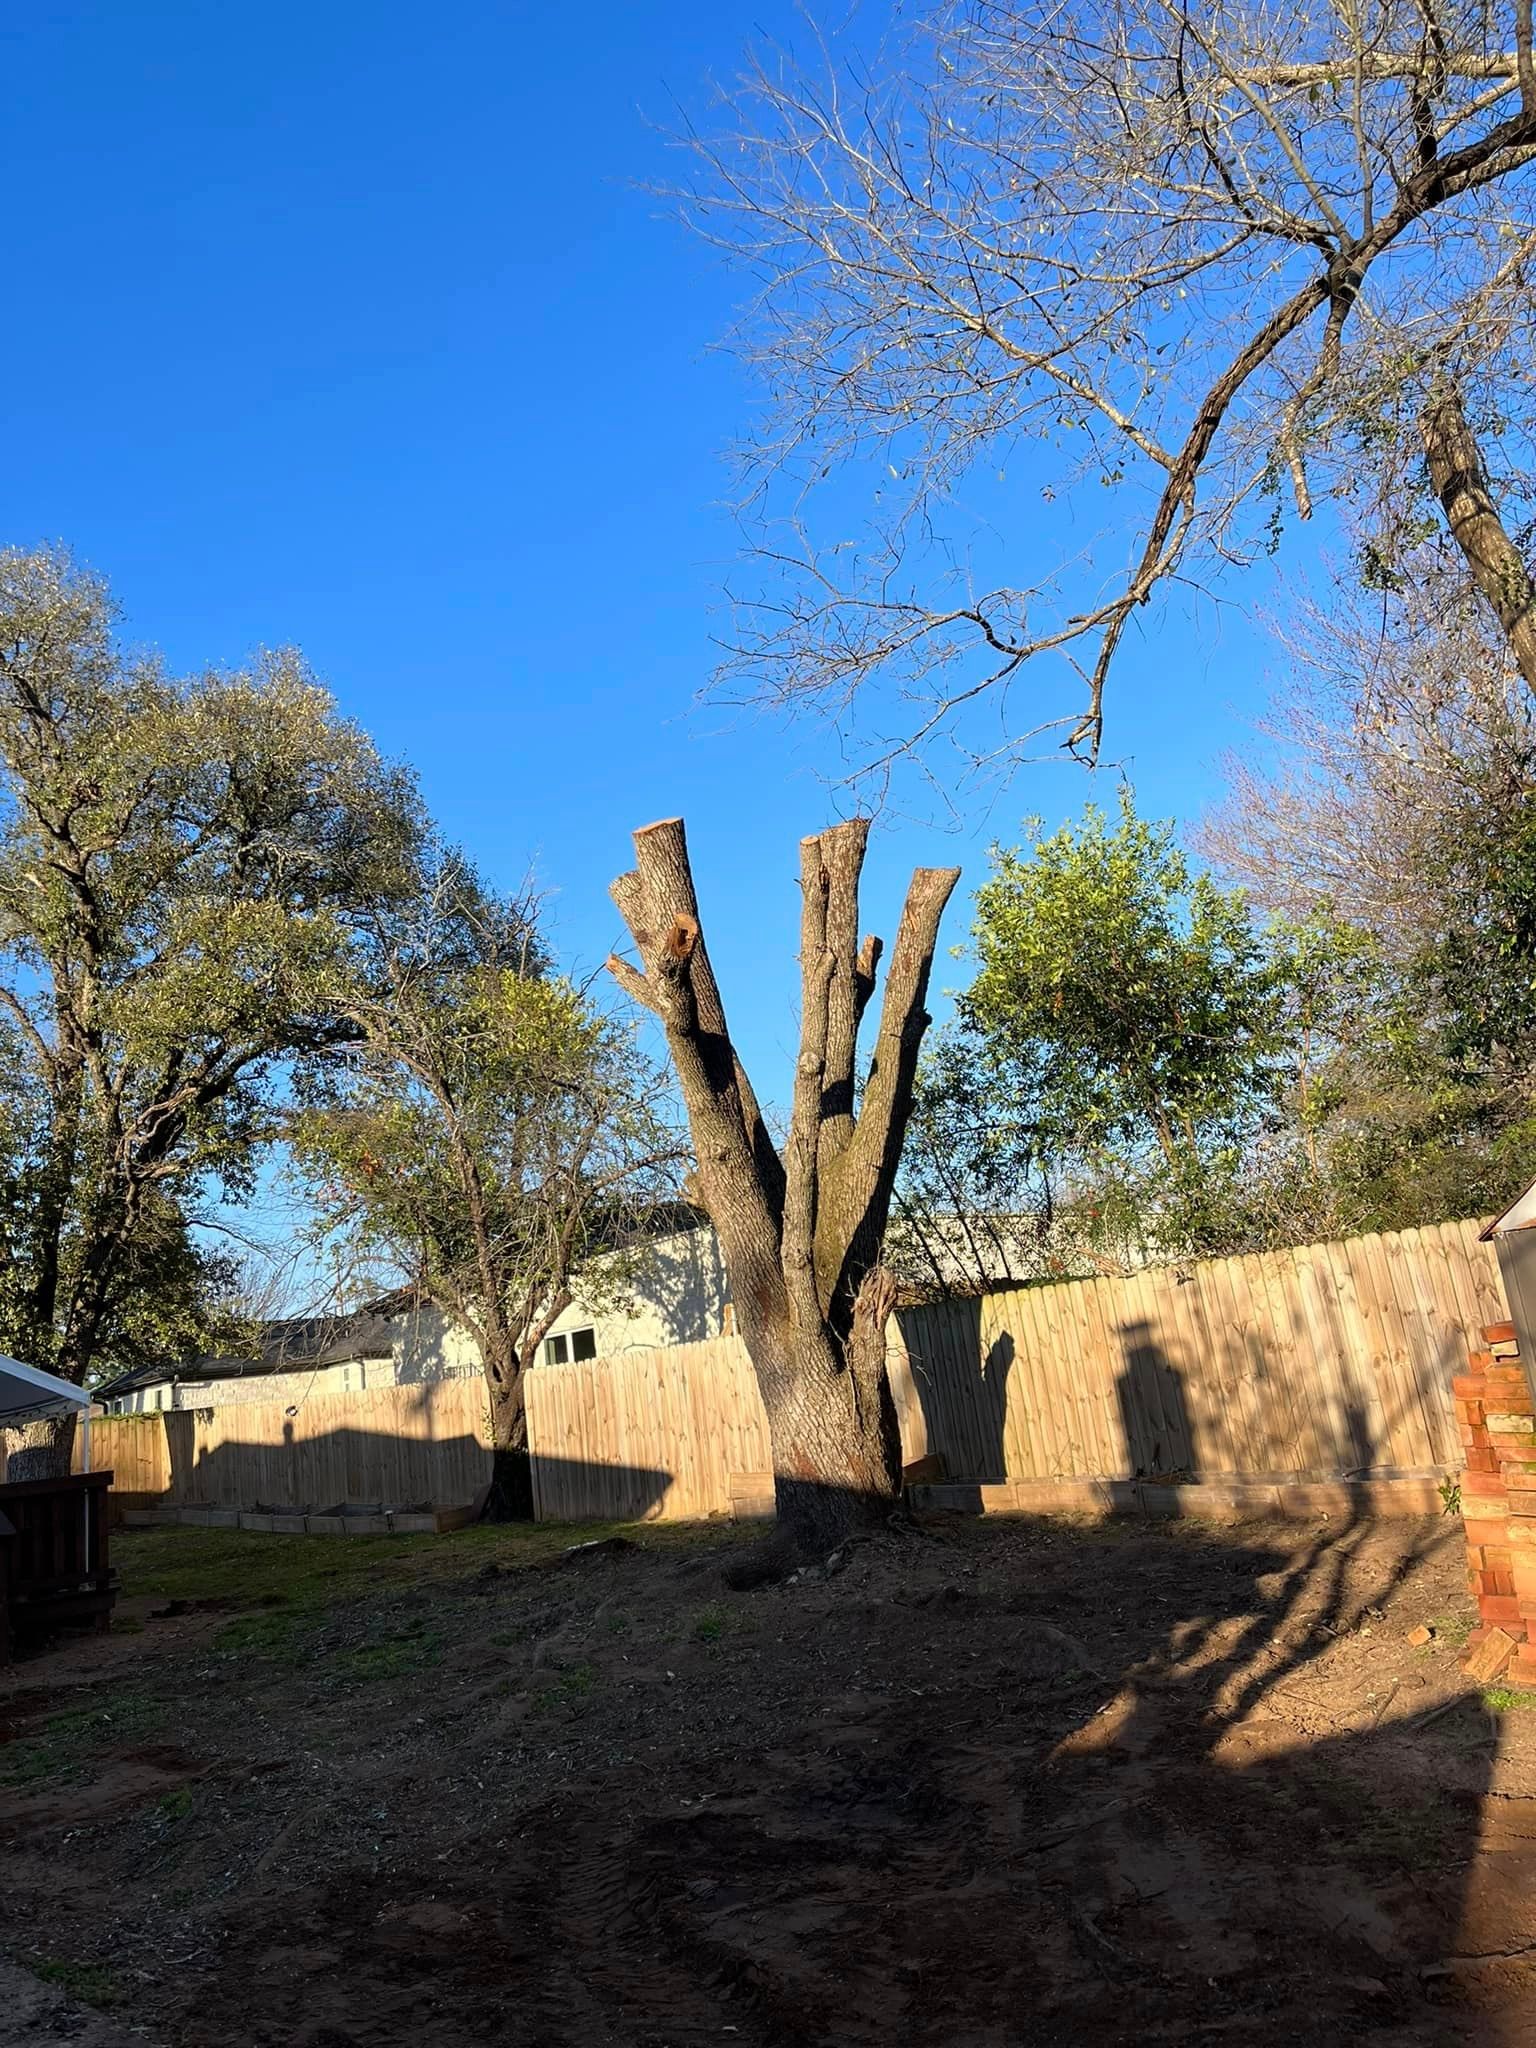 All Photos for Banda’s Tree Service And Lawn Care in Tyler, TX